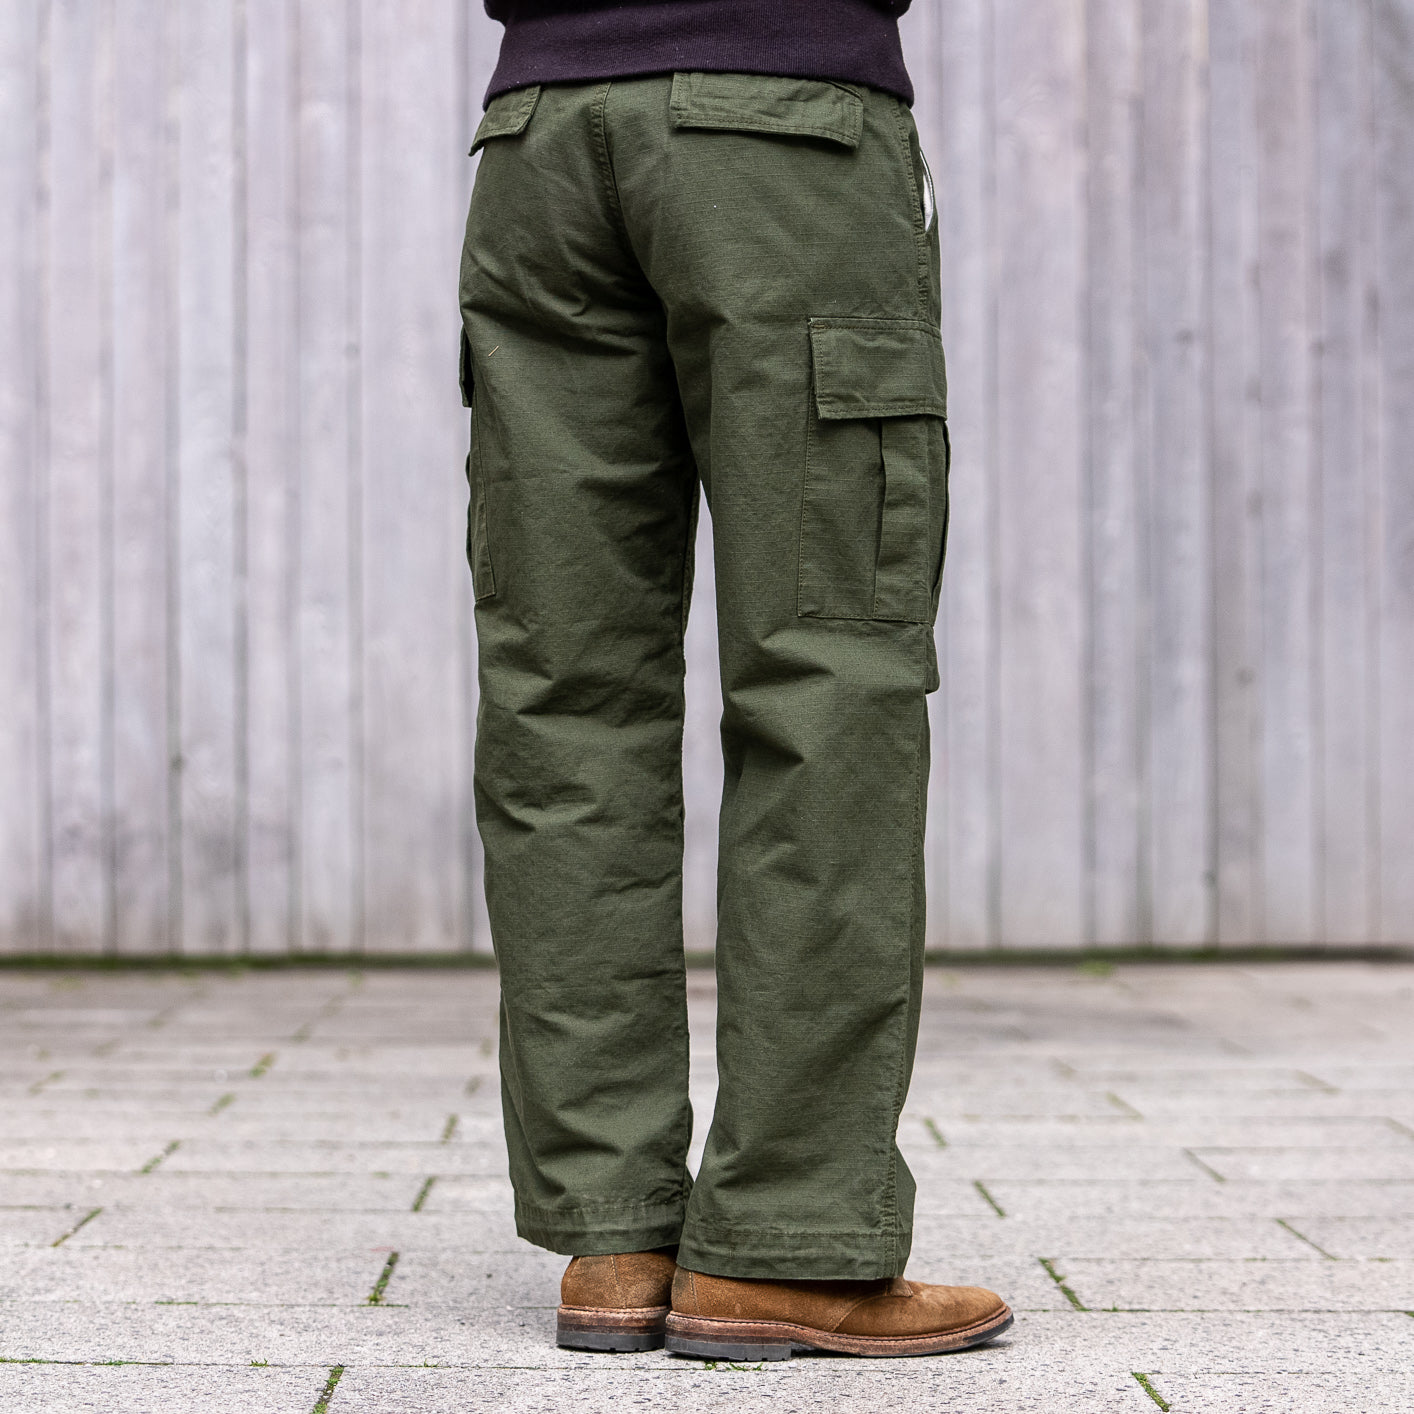 Japan Blue 9,5oz Fatigue Ripstop Modern Military Cargo – Olive Drab /